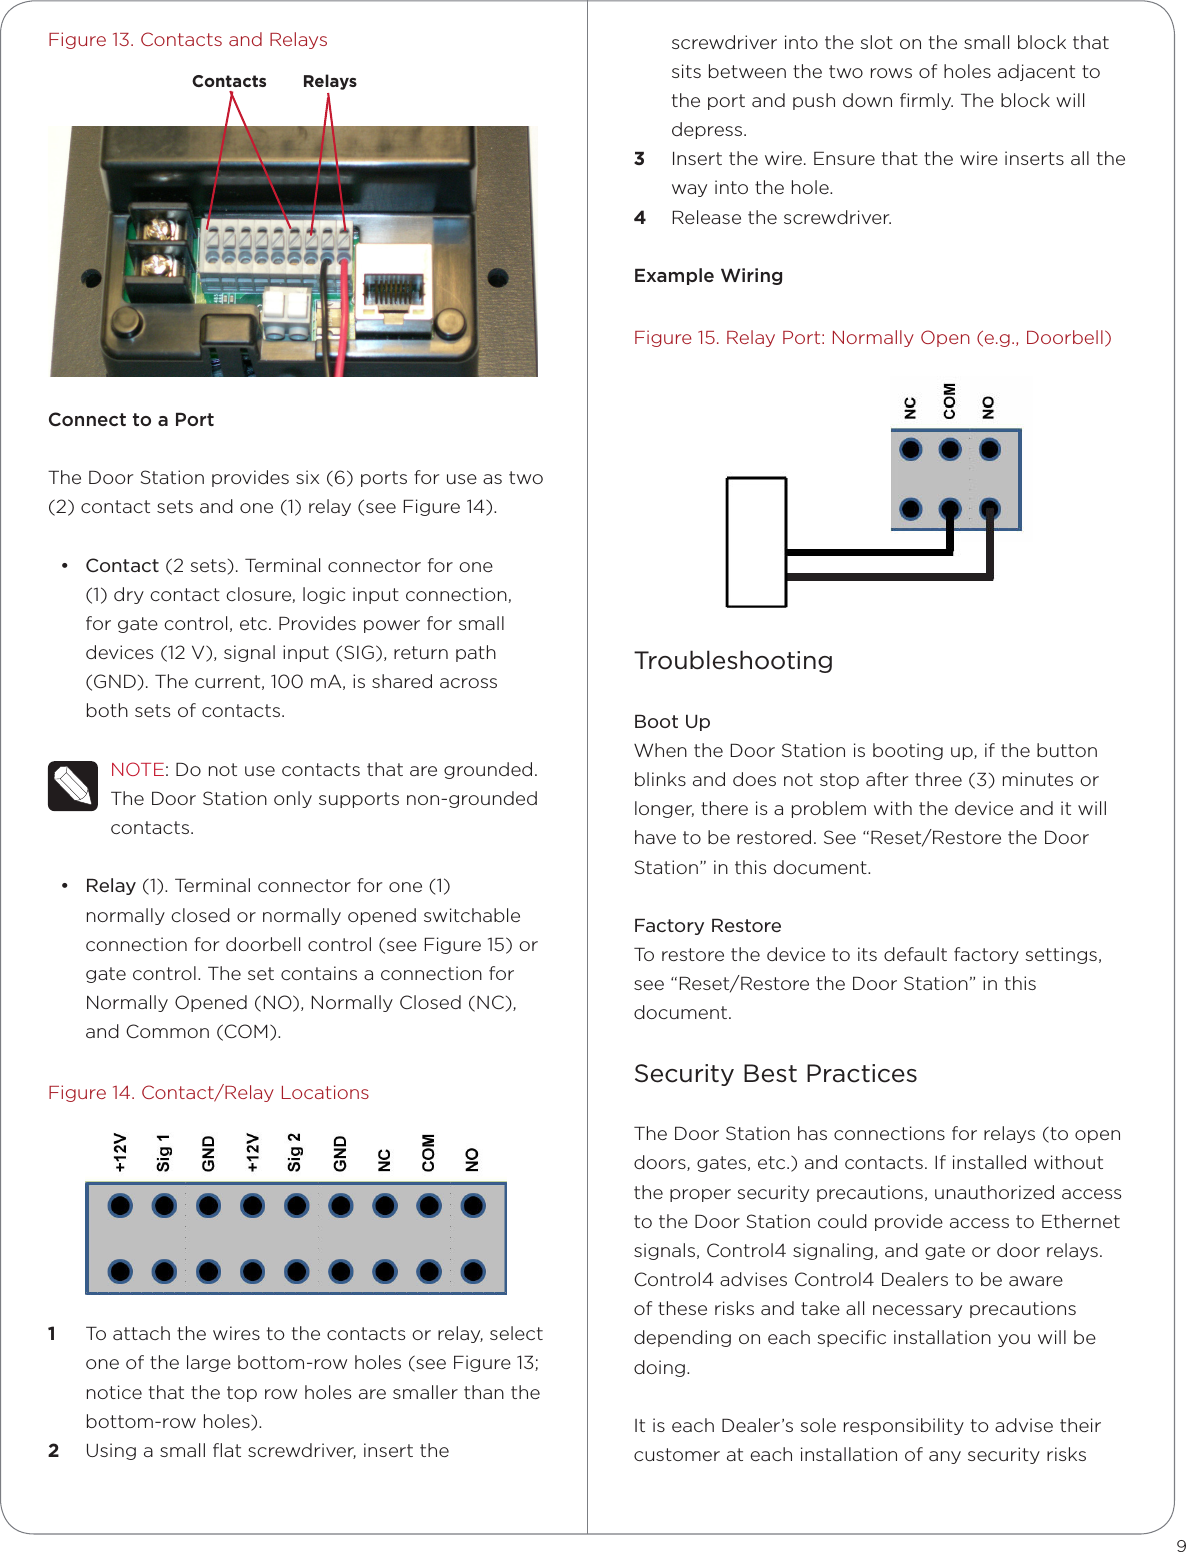 Figure 13. Contacts and RelaysConnect to a PortThe Door Station provides six (6) ports for use as two (2) contact sets and one (1) relay (see Figure 14).• Contact (2 sets). Terminal connector for one (1) dry contact closure, logic input connection, for gate control, etc. Provides power for small devices (12 V), signal input (SIG), return path (GND). The current, 100 mA, is shared across both sets of contacts.NOTE: Do not use contacts that are grounded. The Door Station only supports non-grounded contacts.• Relay (1). Terminal connector for one (1) normally closed or normally opened switchable connection for doorbell control (see Figure 15) or gate control. The set contains a connection for Normally Opened (NO), Normally Closed (NC), and Common (COM). Figure 14. Contact/Relay Locations1  To attach the wires to the contacts or relay, select one of the large bottom-row holes (see Figure 13; notice that the top row holes are smaller than the bottom-row holes).2  Using a small ﬂat screwdriver, insert the 9screwdriver into the slot on the small block that sits between the two rows of holes adjacent to the port and push down ﬁrmly. The block will depress.3  Insert the wire. Ensure that the wire inserts all the way into the hole. 4  Release the screwdriver.Example WiringFigure 15. Relay Port: Normally Open (e.g., Doorbell)TroubleshootingBoot UpWhen the Door Station is booting up, if the button blinks and does not stop after three (3) minutes or longer, there is a problem with the device and it will have to be restored. See “Reset/Restore the Door Station” in this document.Factory RestoreTo restore the device to its default factory settings, see “Reset/Restore the Door Station” in this document.Security Best Practices The Door Station has connections for relays (to open doors, gates, etc.) and contacts. If installed without the proper security precautions, unauthorized access to the Door Station could provide access to Ethernet signals, Control4 signaling, and gate or door relays. Control4 advises Control4 Dealers to be aware of these risks and take all necessary precautions depending on each speciﬁc installation you will be doing. It is each Dealer’s sole responsibility to advise their customer at each installation of any security risks Contacts Relays